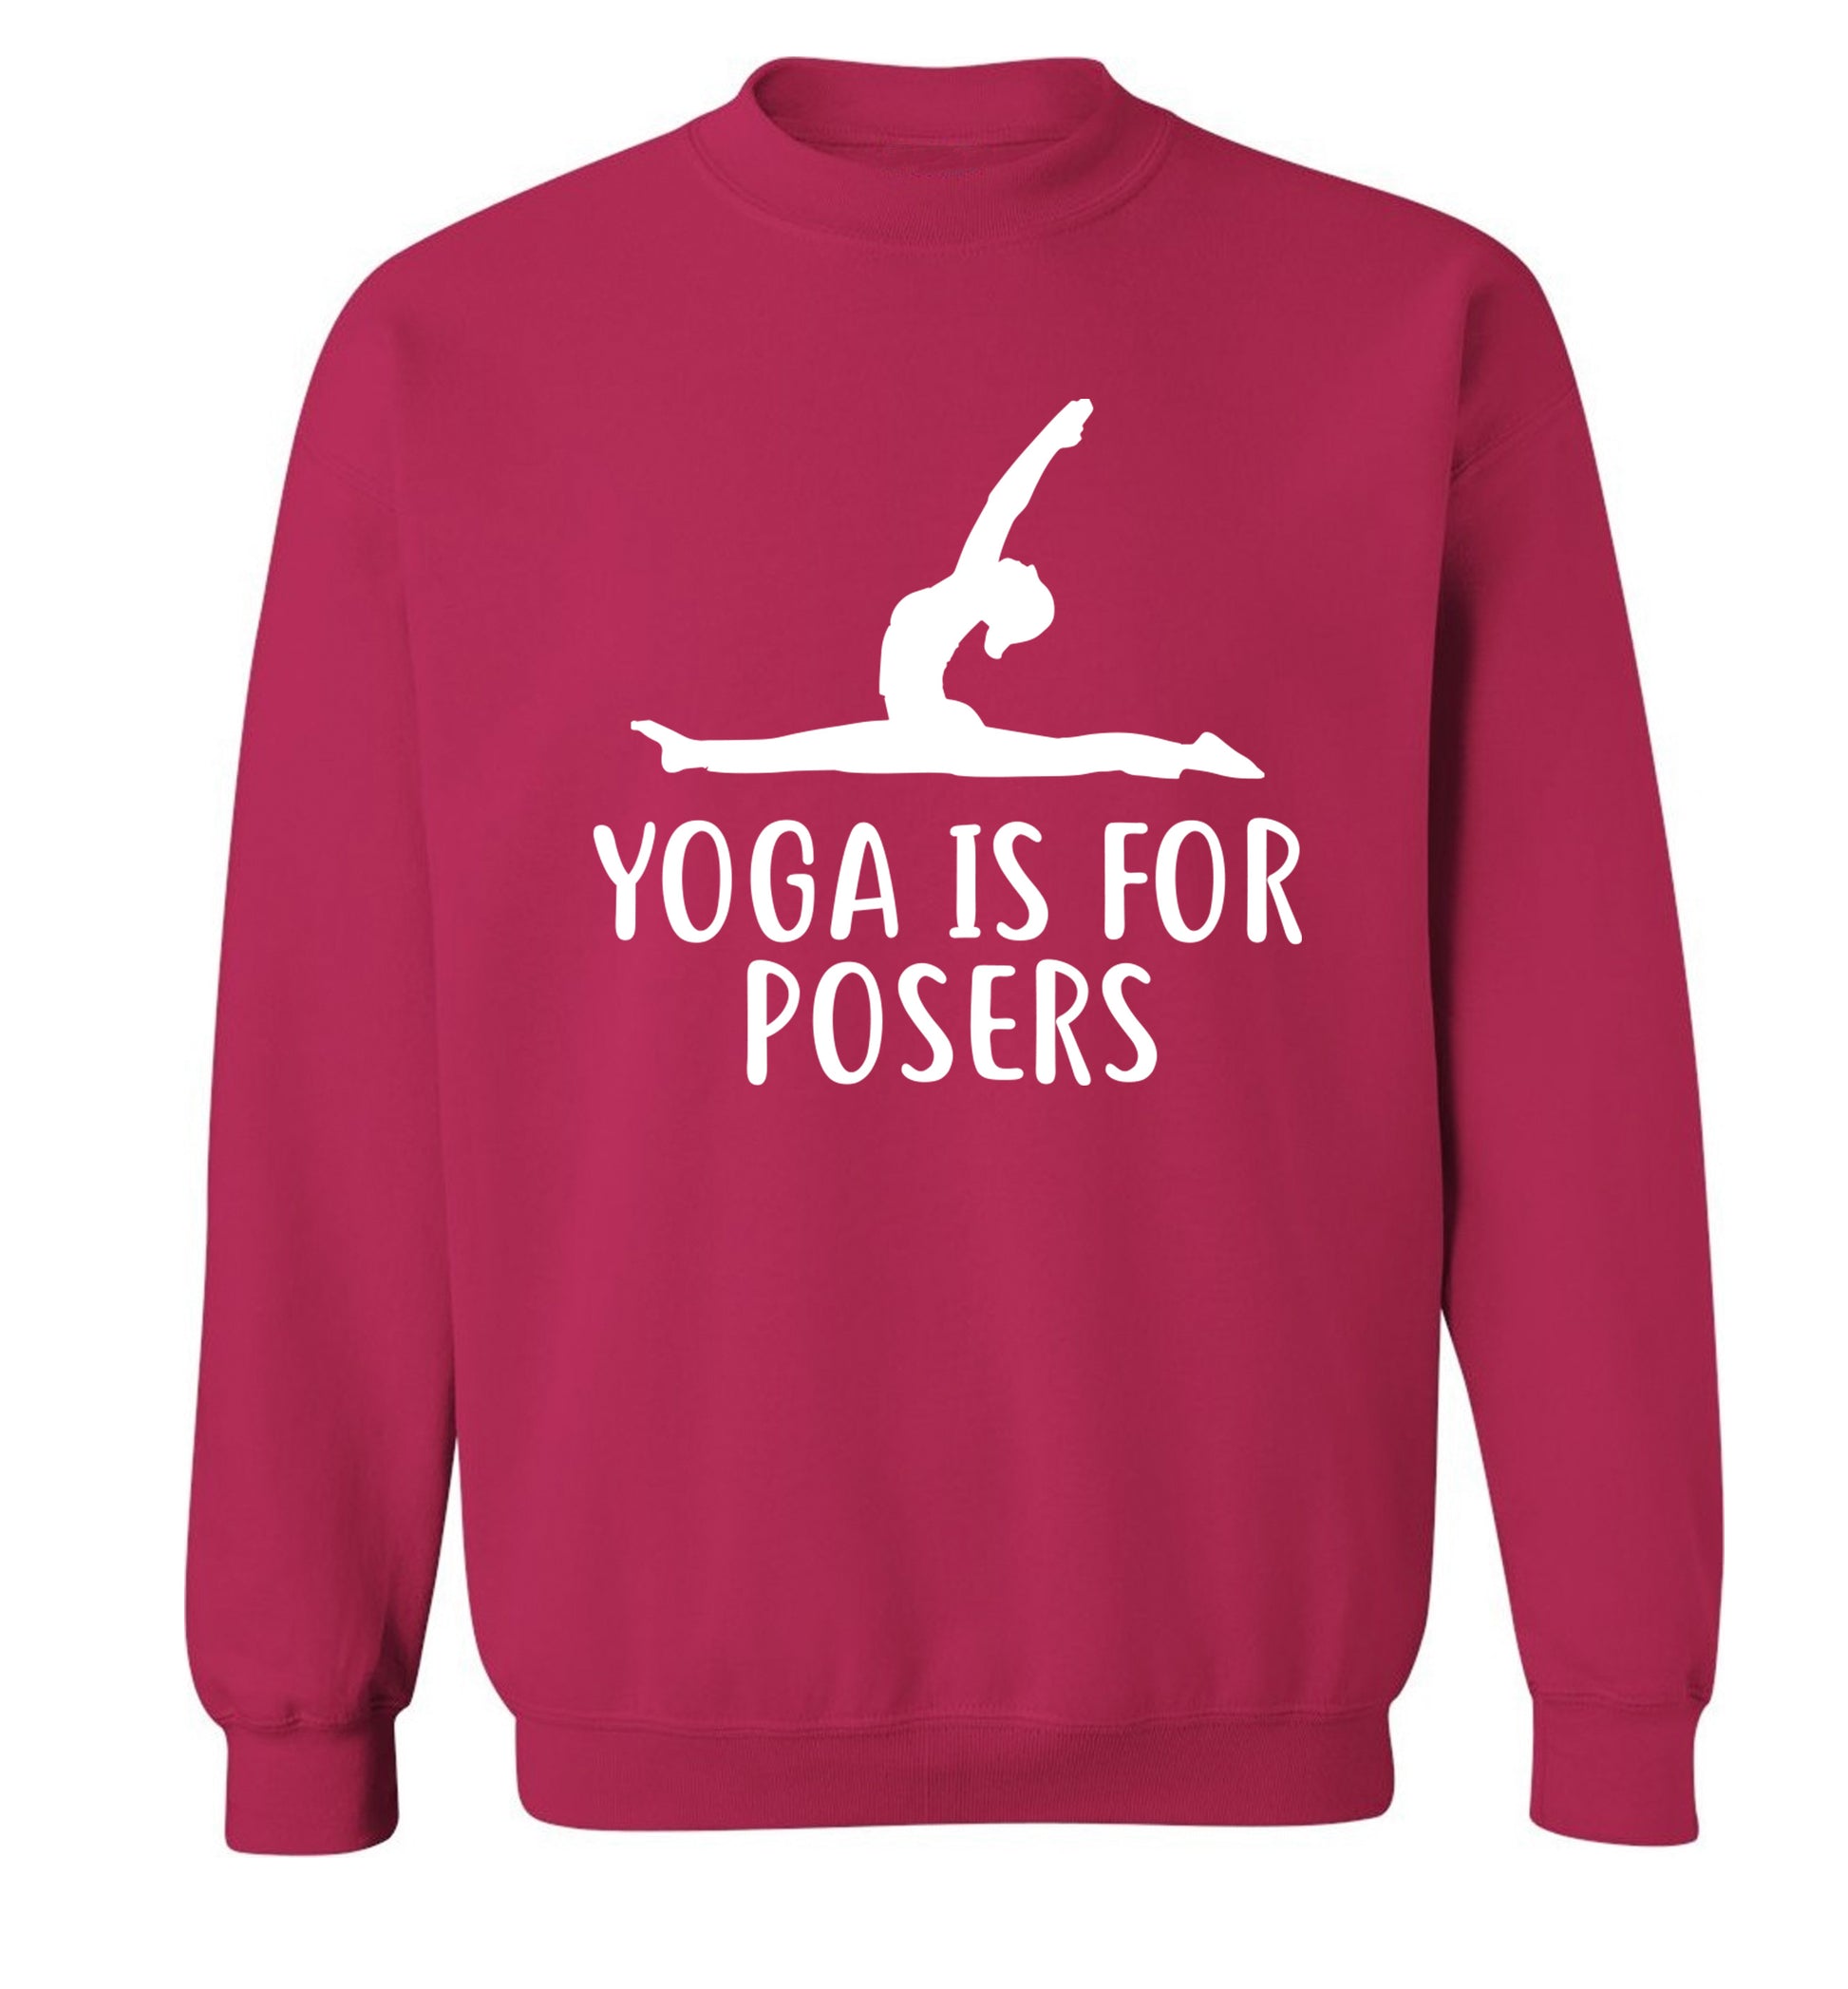 Yoga is for posers Adult's unisex pink Sweater 2XL